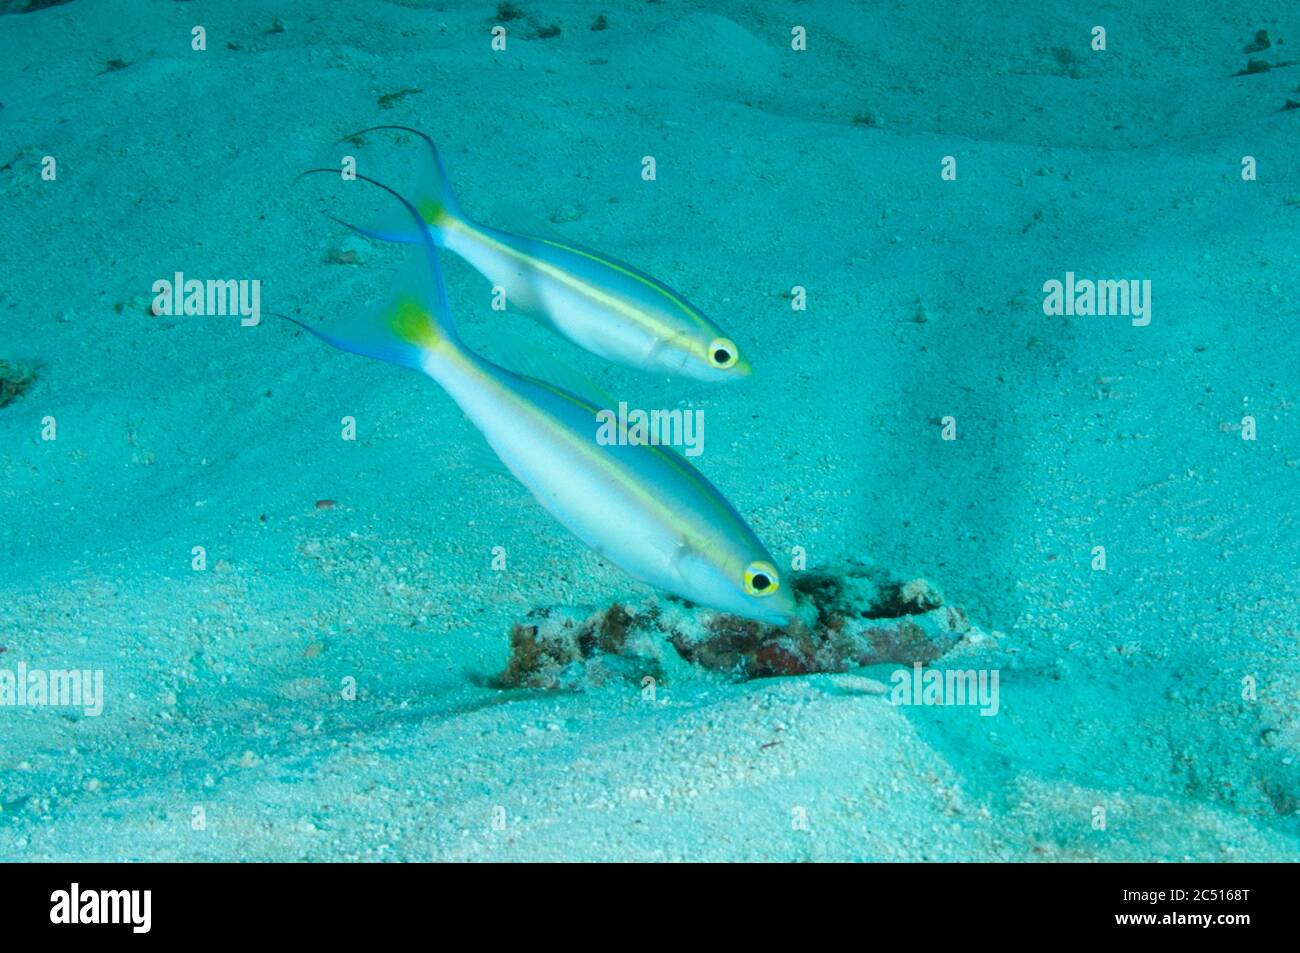 Pair of Double Whiptails, Pentapodus emeryii, by hole, Manta Sandy dive site, Arborek, Dampier Straits, Raja Ampat, West Papua, Indonesia Stock Photo